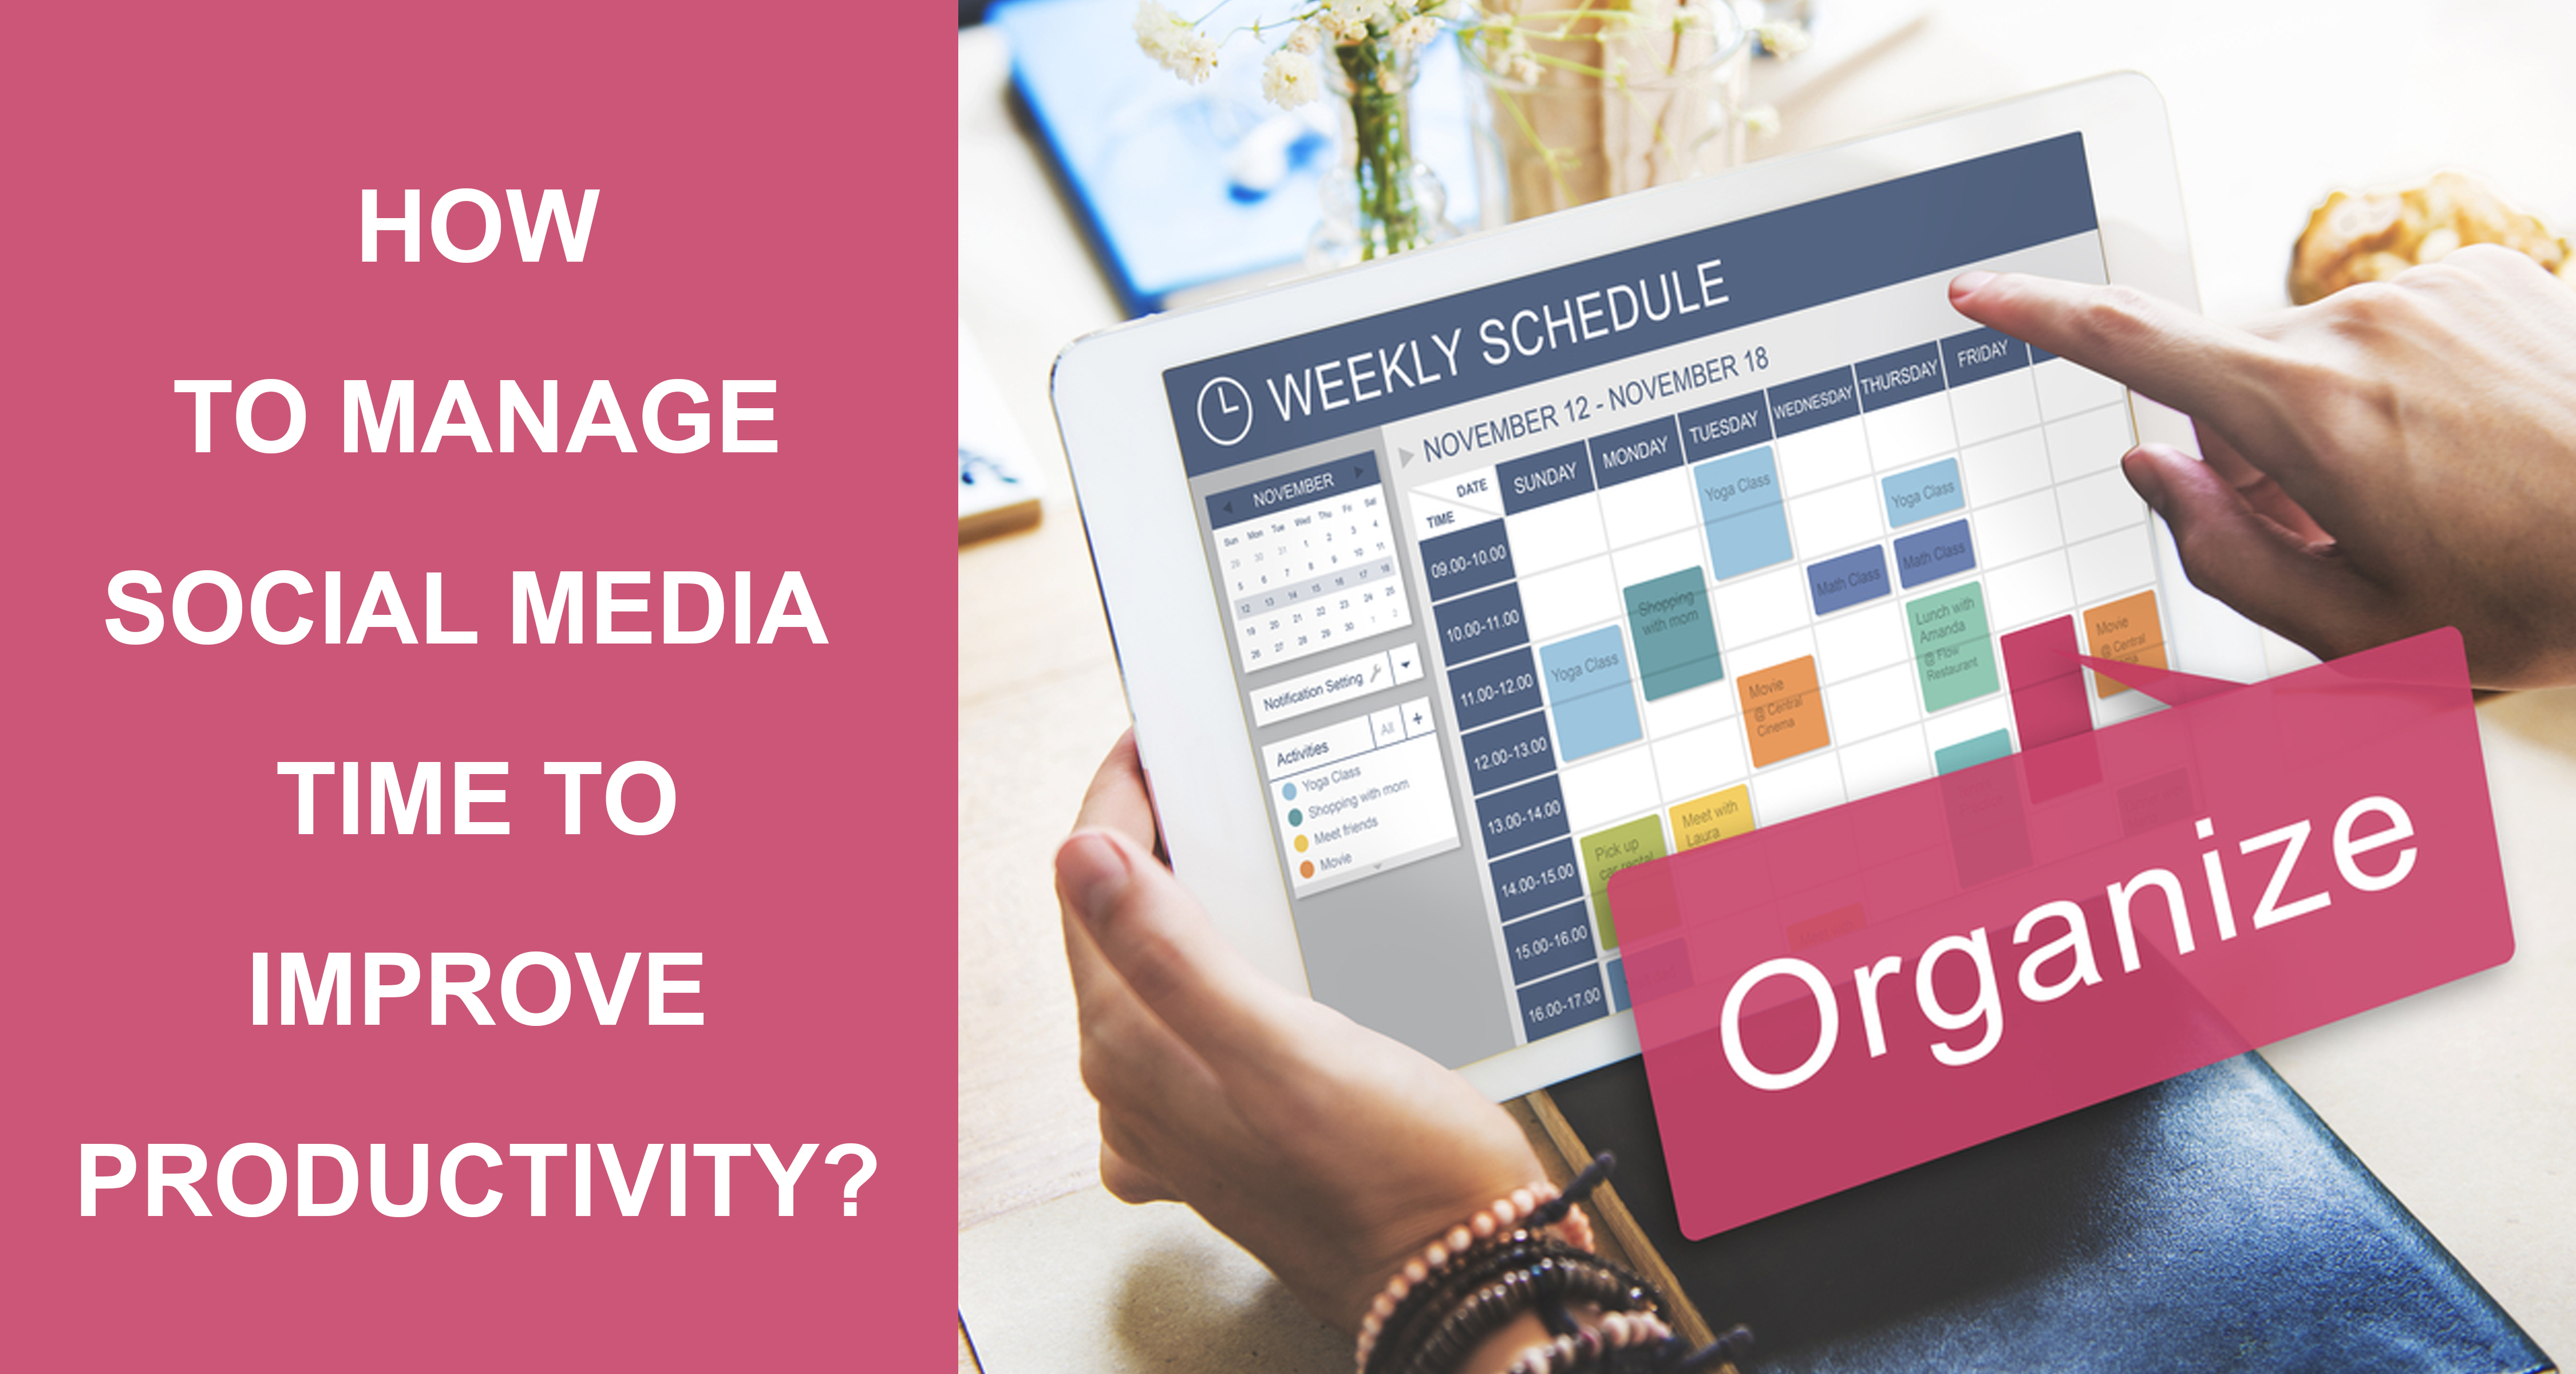 How To Manage Social Media Time To Improve Productivity